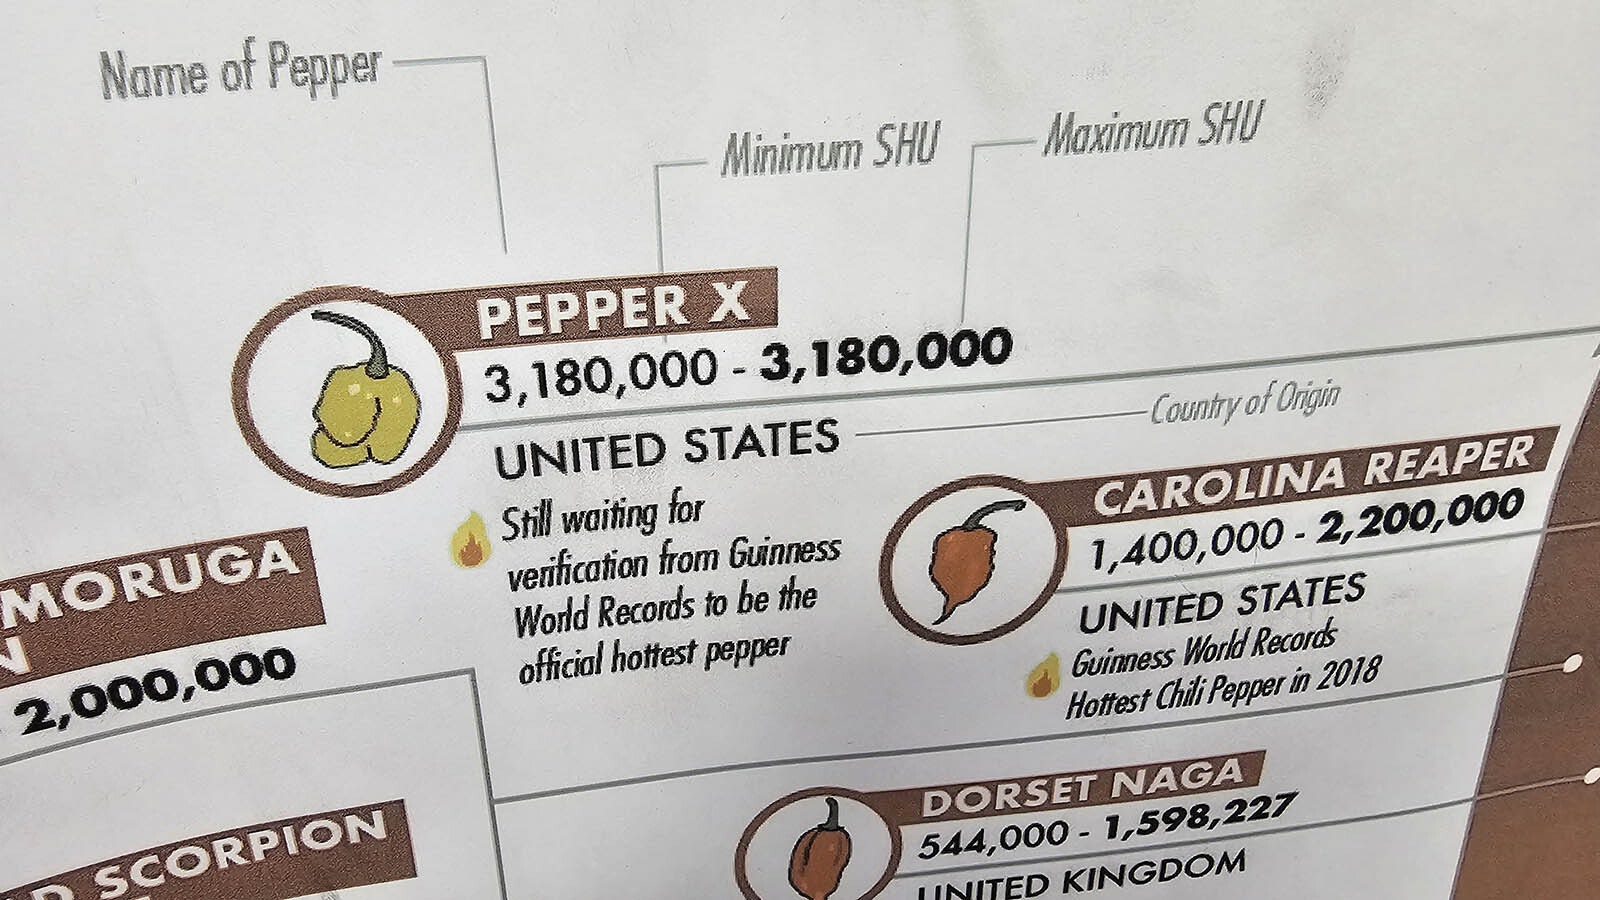 The Pepper X has since been verified as a world record, and it is 3.18 million on the Scoville Heat Scale, which ranks the hot peppers of the world based on their heat.